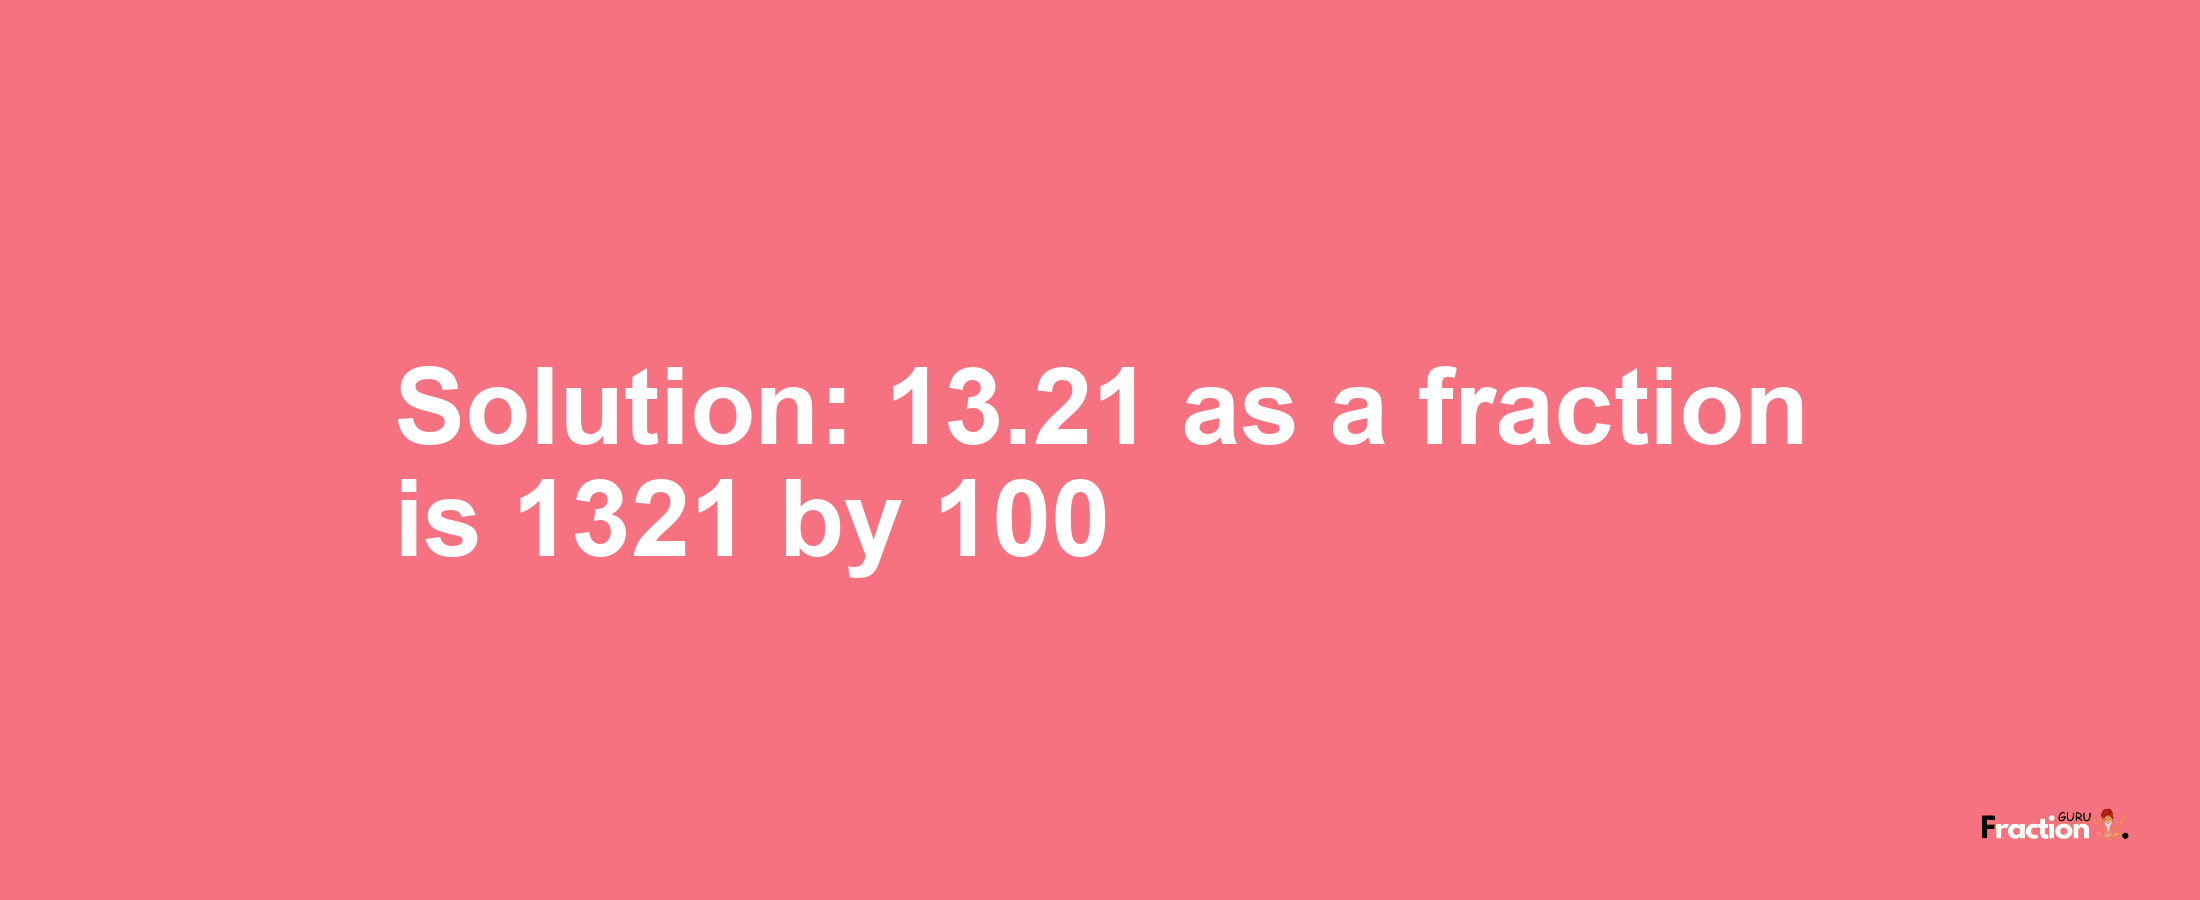 Solution:13.21 as a fraction is 1321/100